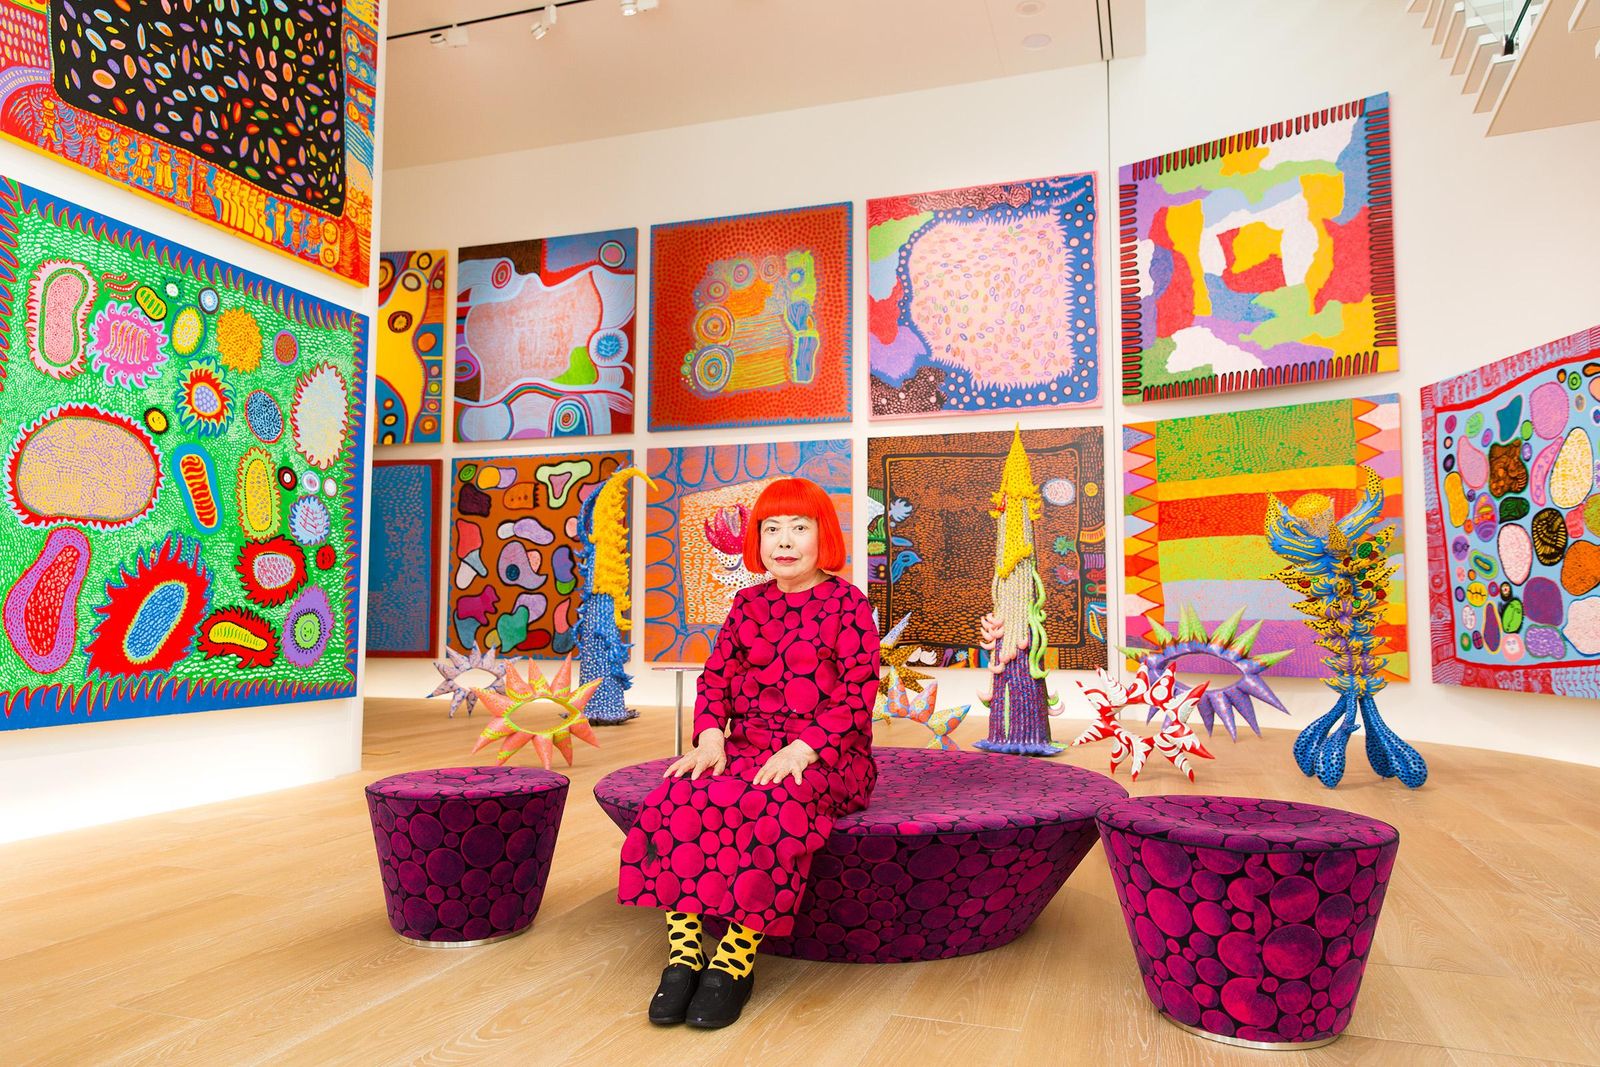 More about Yayoi Kusama – Letters from Athens